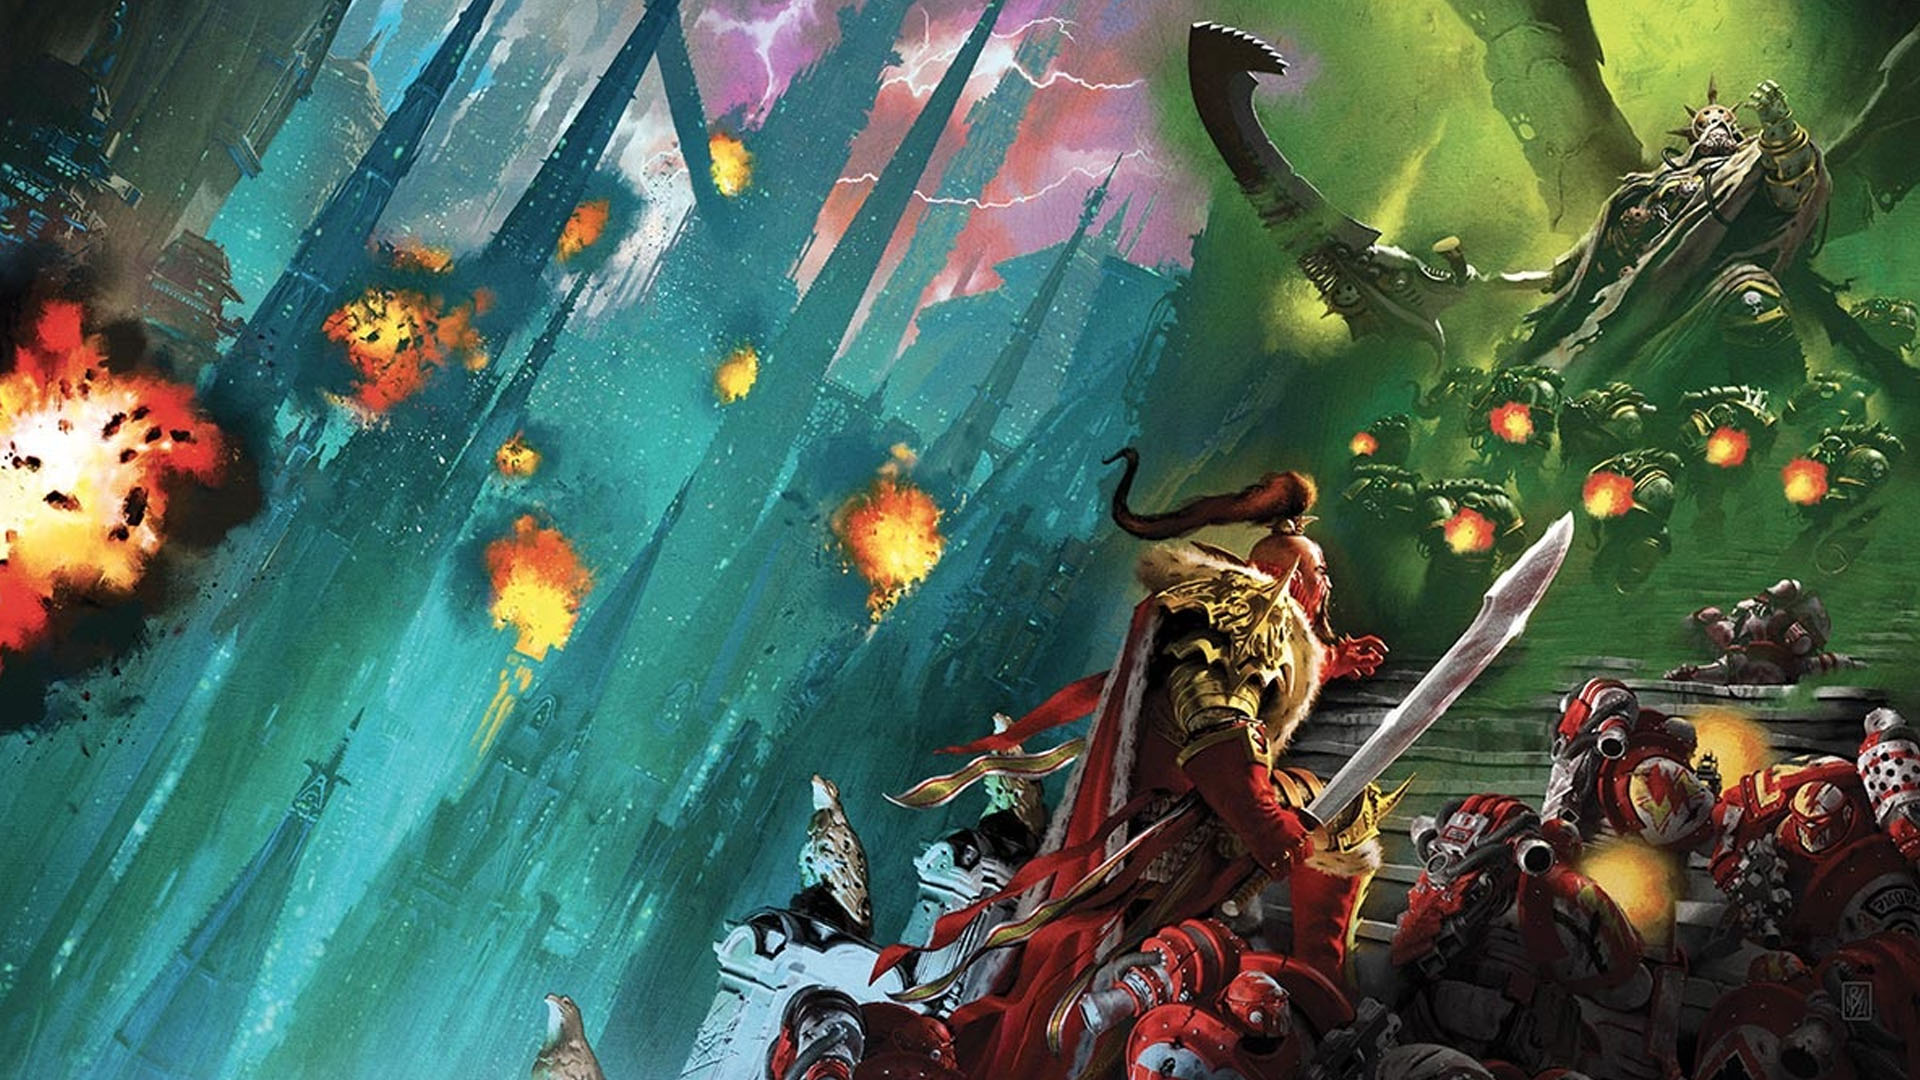 Warhammer 40k Mortarion Primarch guide - Games Workshop artwork showing Mortarion fighting Jaghatai Khan of the White Scars during the Horus Heresy